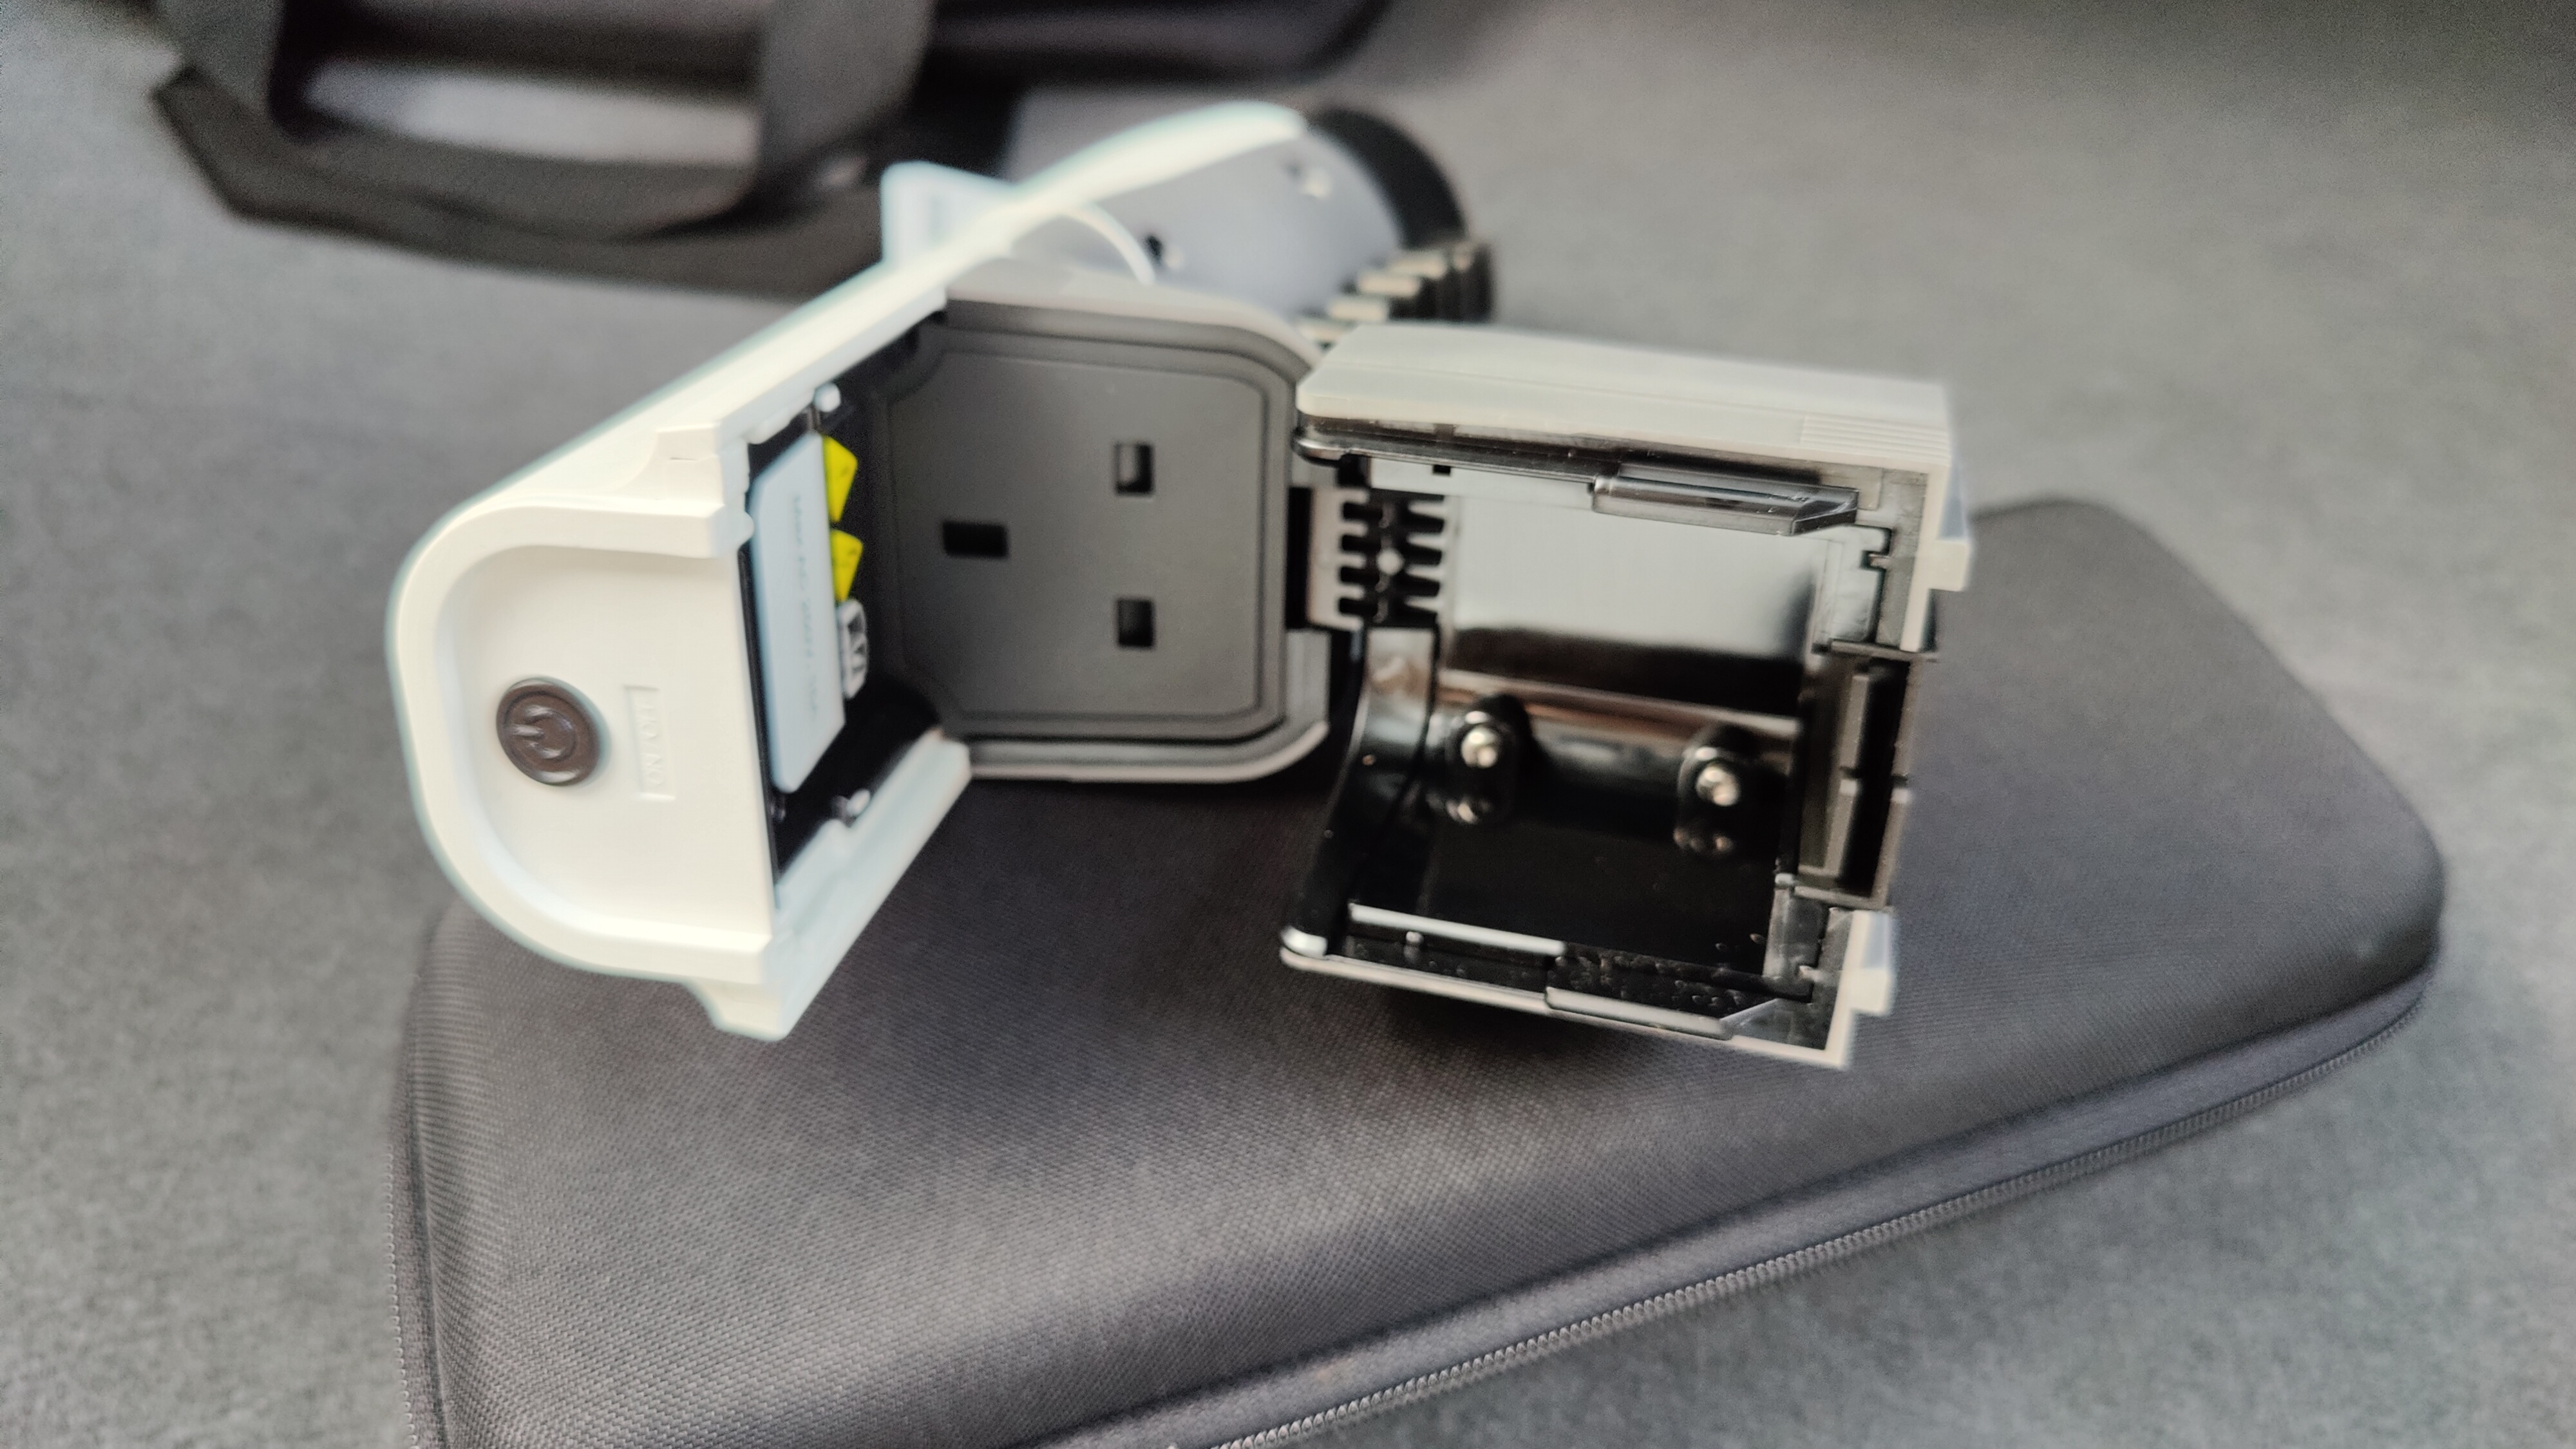 Charge port adaptor for the Ioniq 5